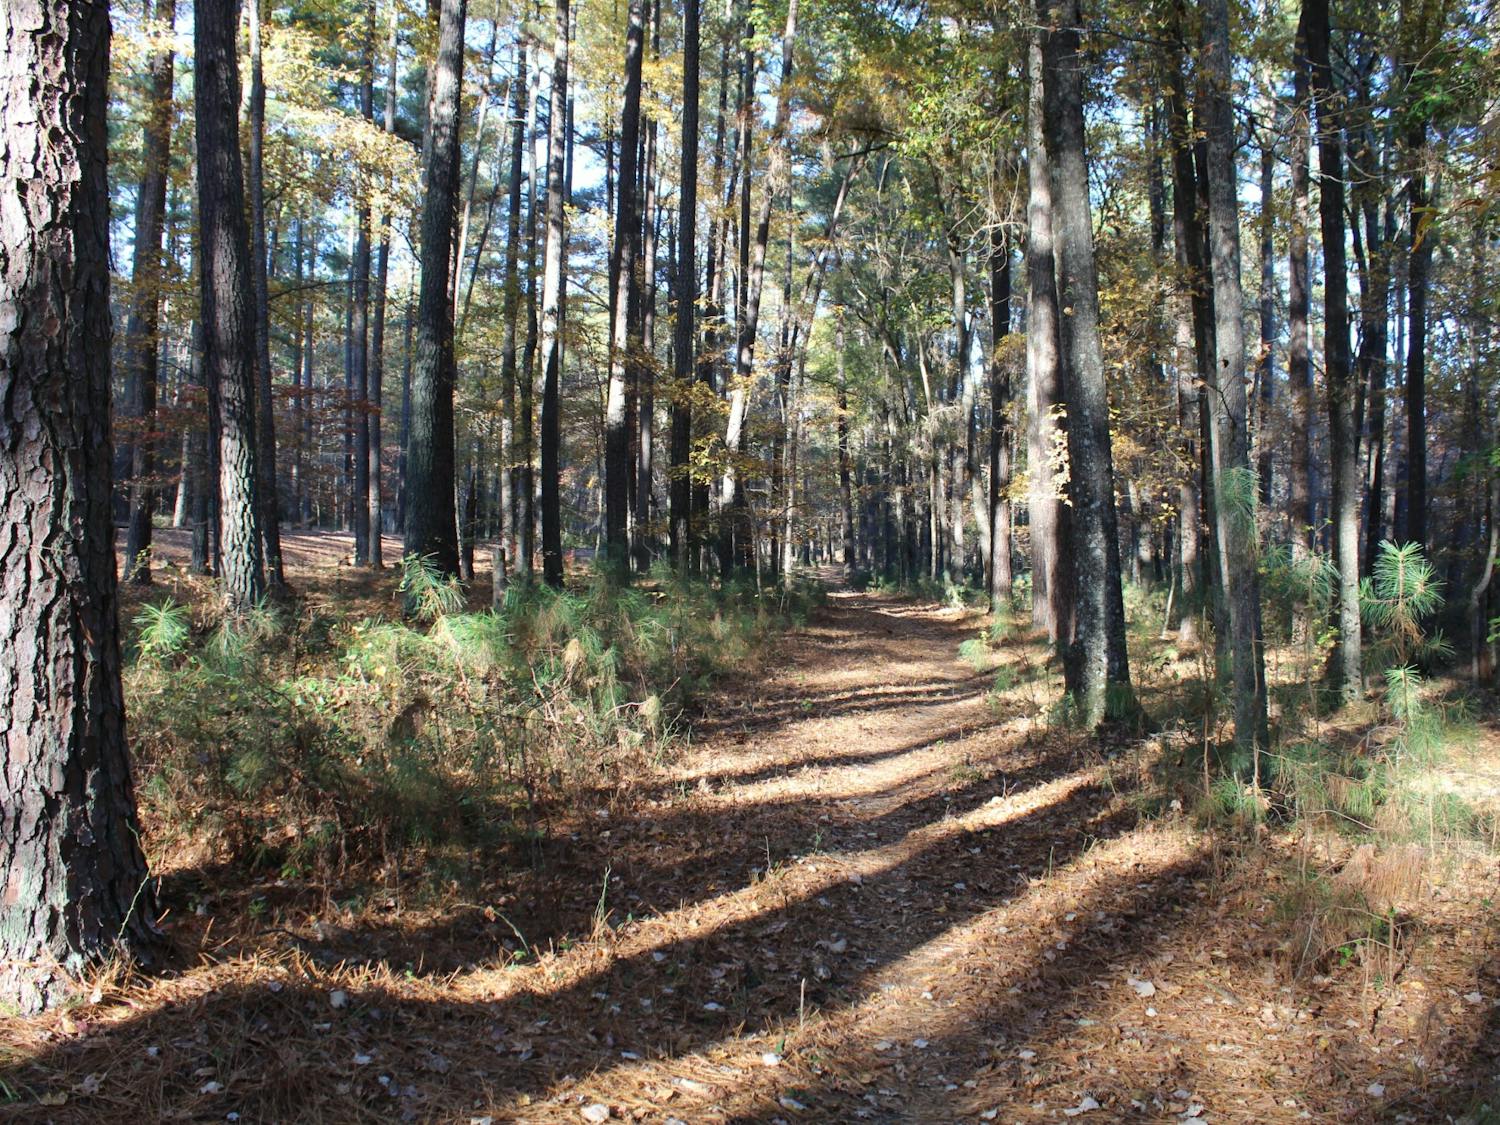 The Greene Tract Forest is made up of more than 160 acres of undeveloped woodland and is a popular place for trail running, biking, bird watching, and other outdoor activities.